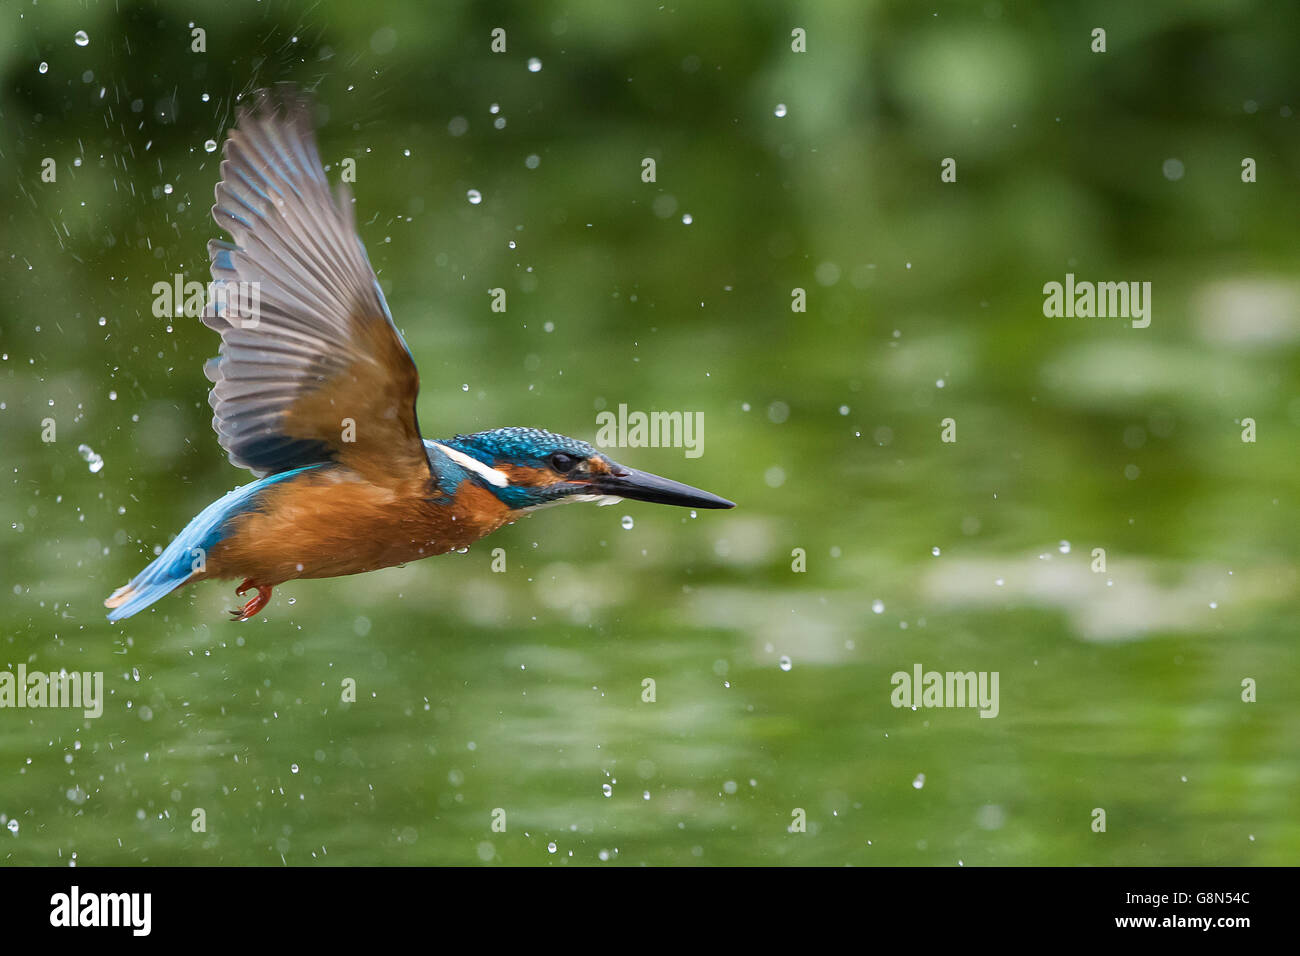 Flying Kingfisher (Alcedo atthis) flying, with water drops, Hesse, Germany Stock Photo